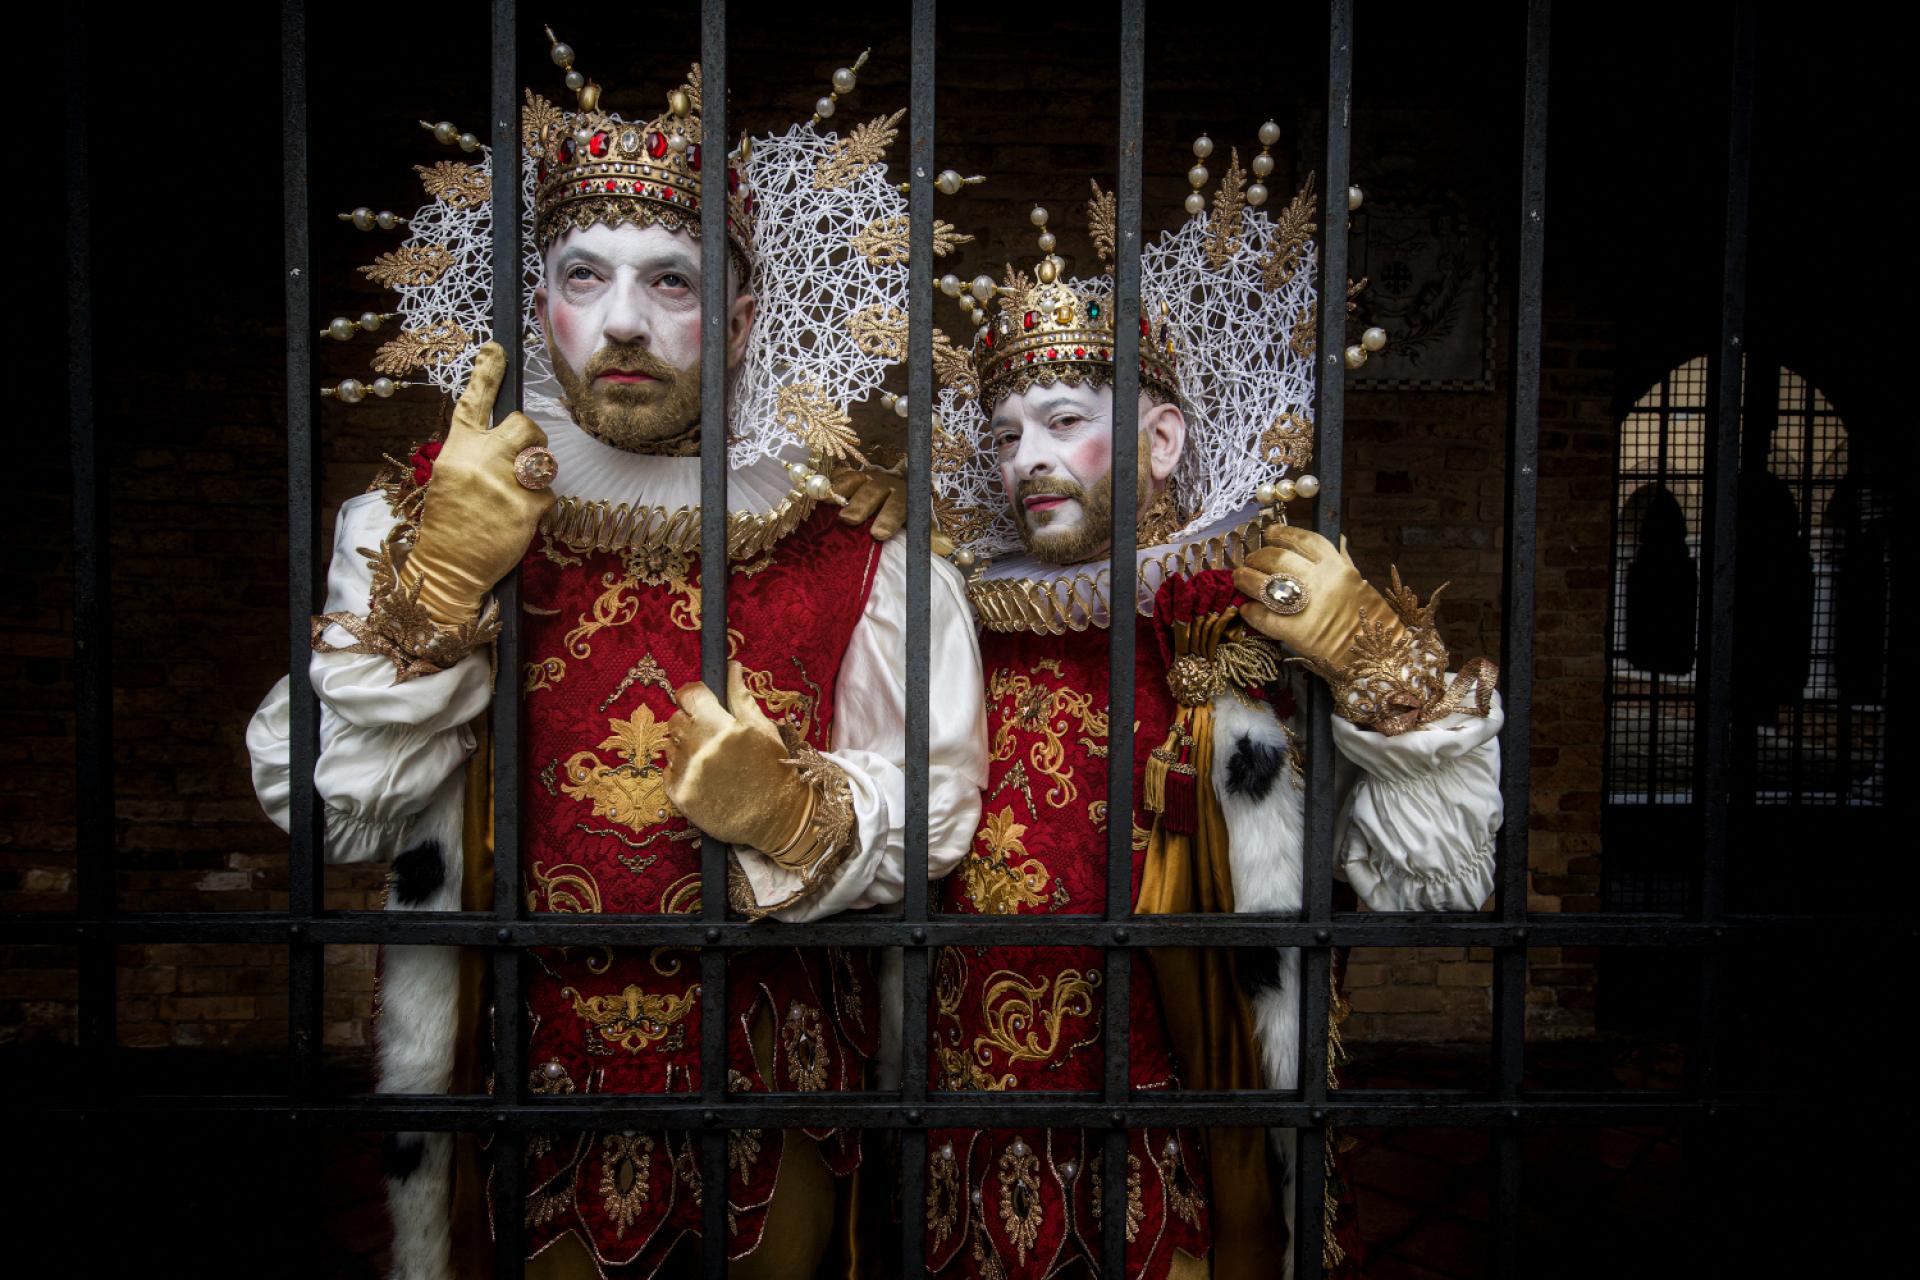 London Photography Awards Winner - Persecution of the Kings